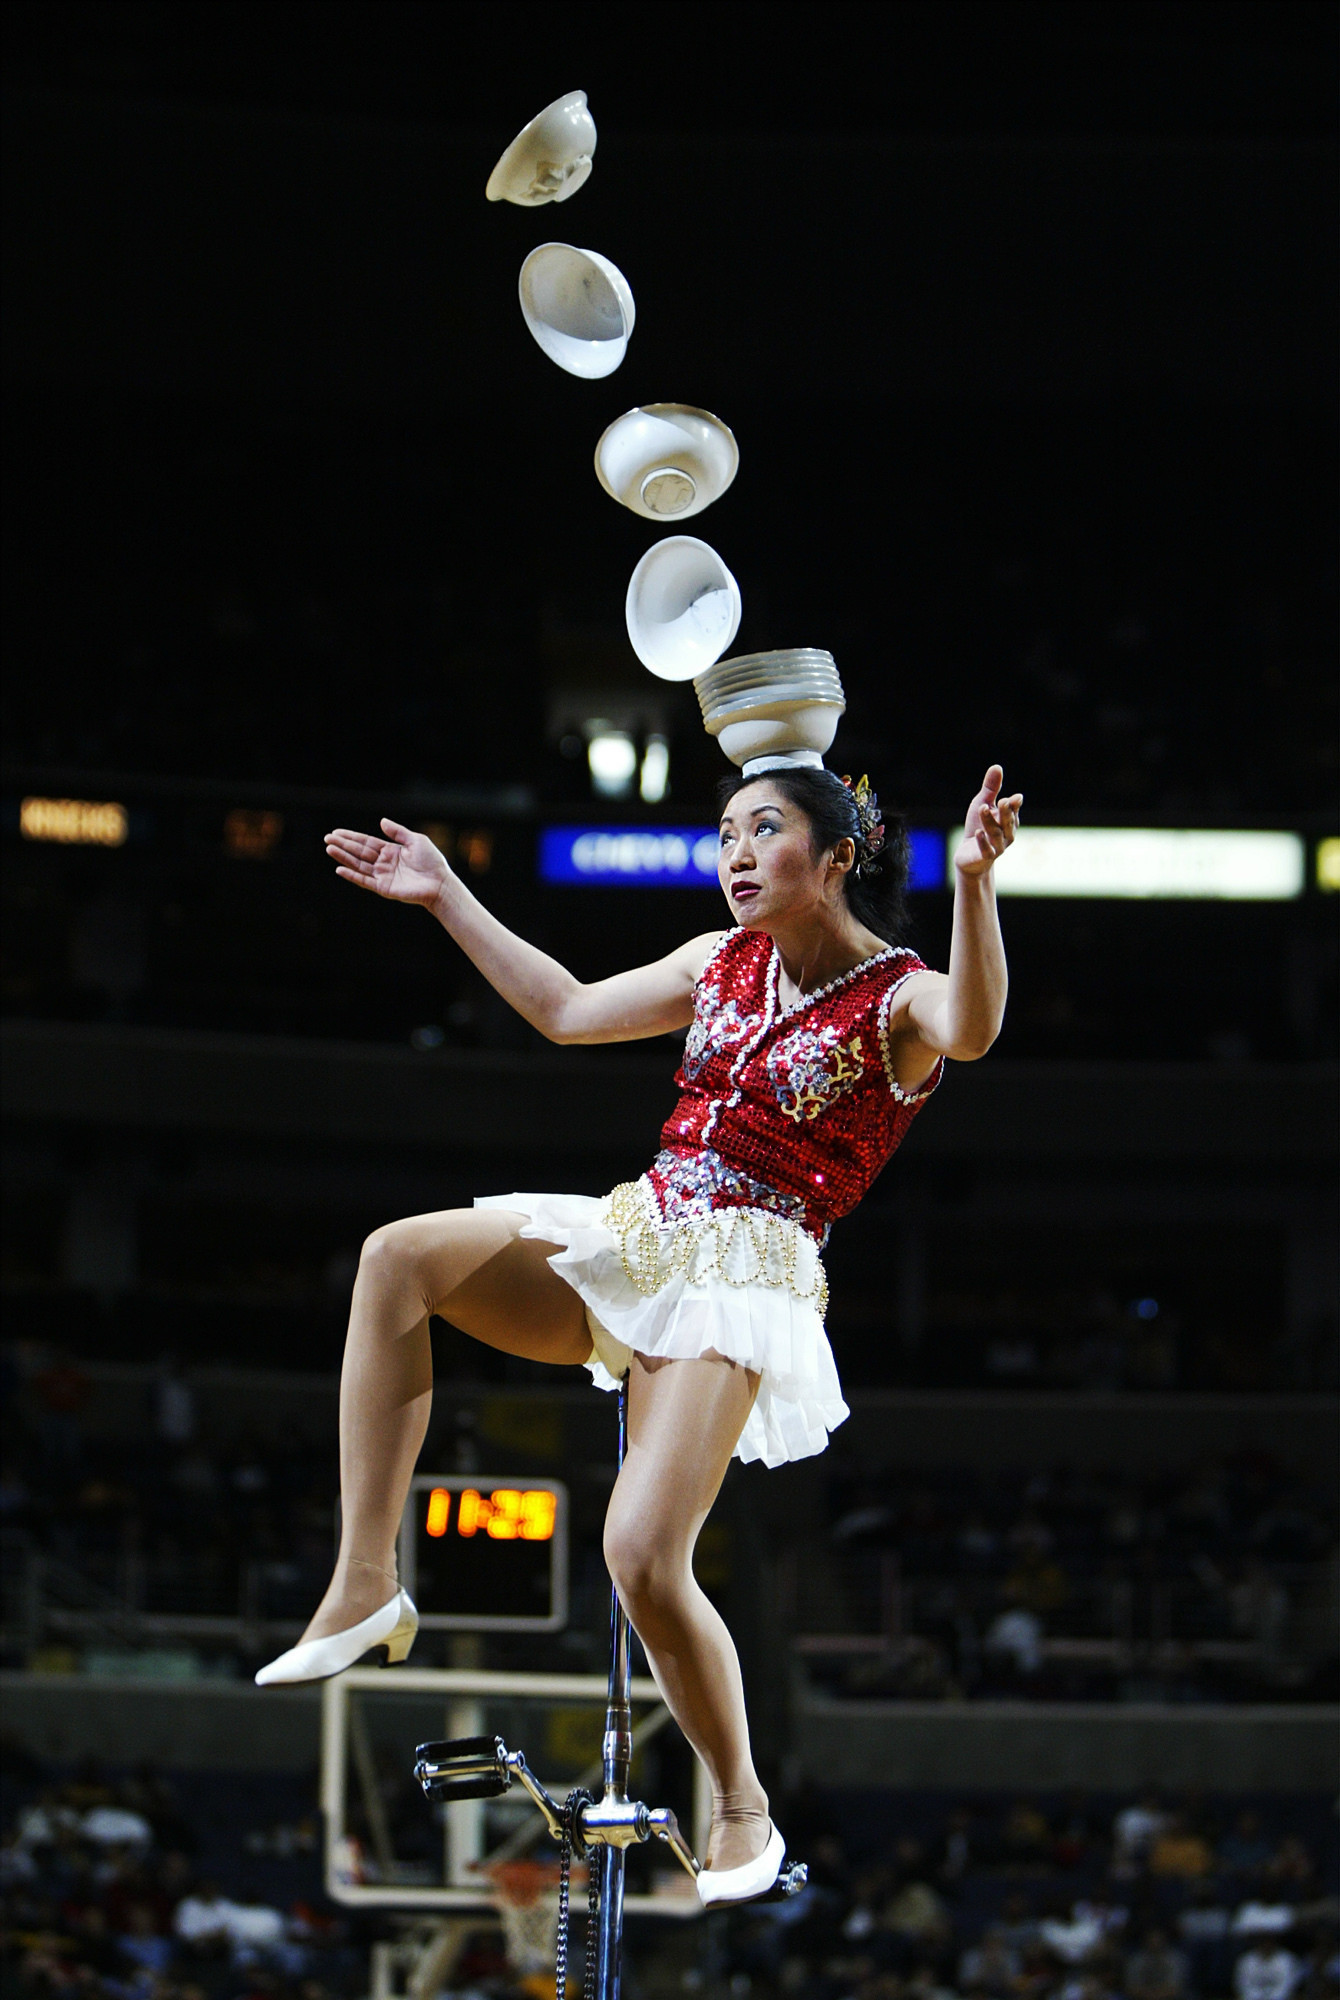 Warriors to replace Red Panda's stolen $25k unicycle - Chicago Tribune1340 x 2000